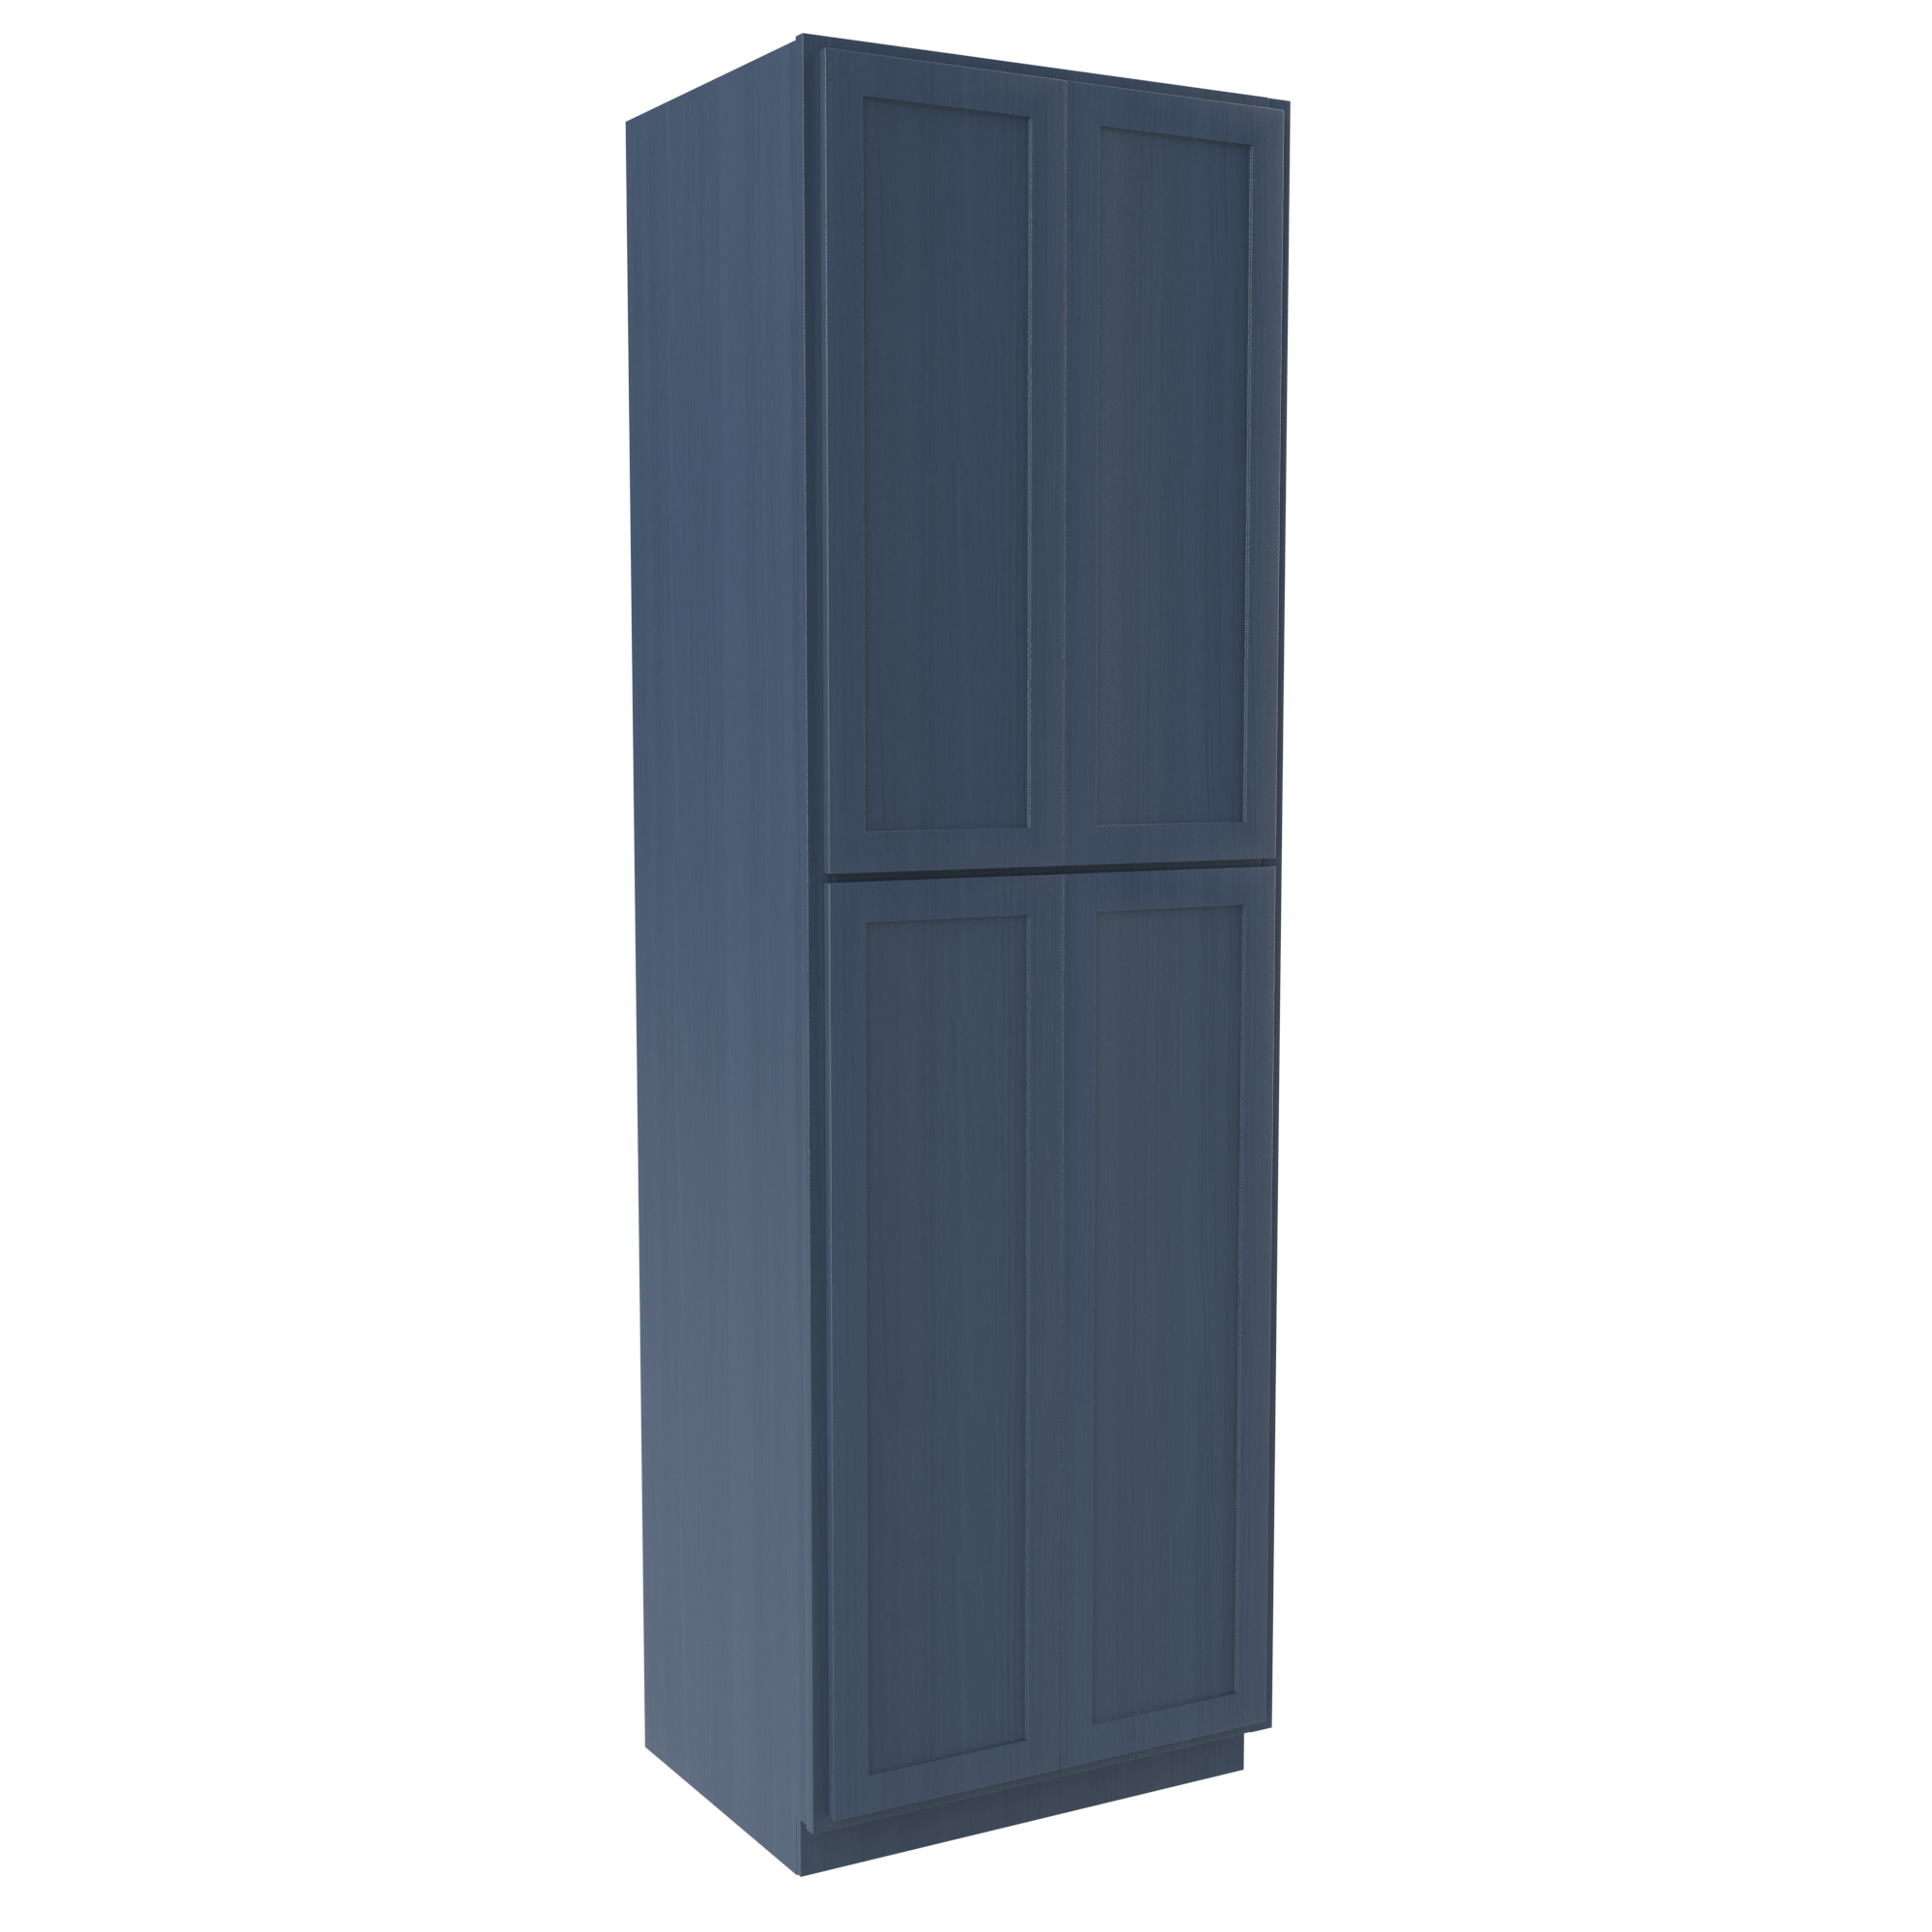 Wall Pantry Cabinet - 30W x 96H x 30D - Blue Shaker Cabinet